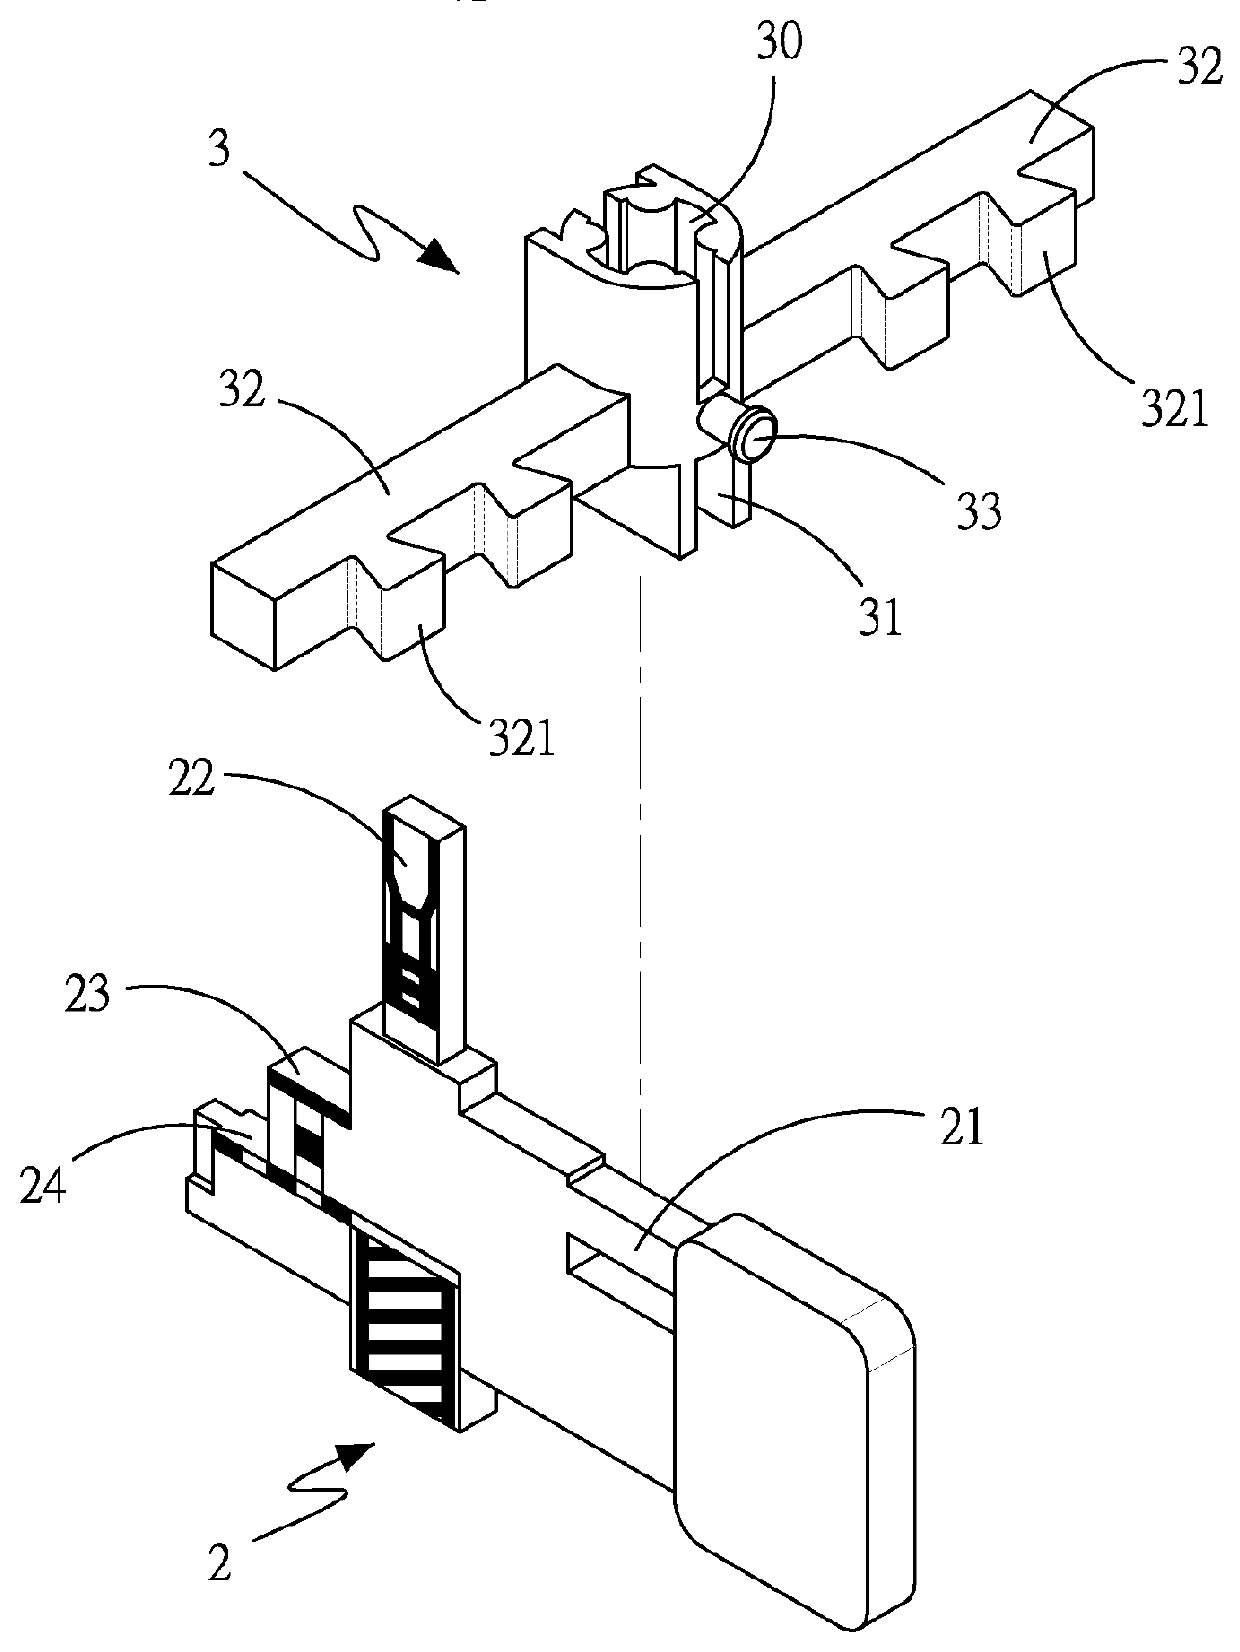 Drill bit guiding device for dental implant surgery